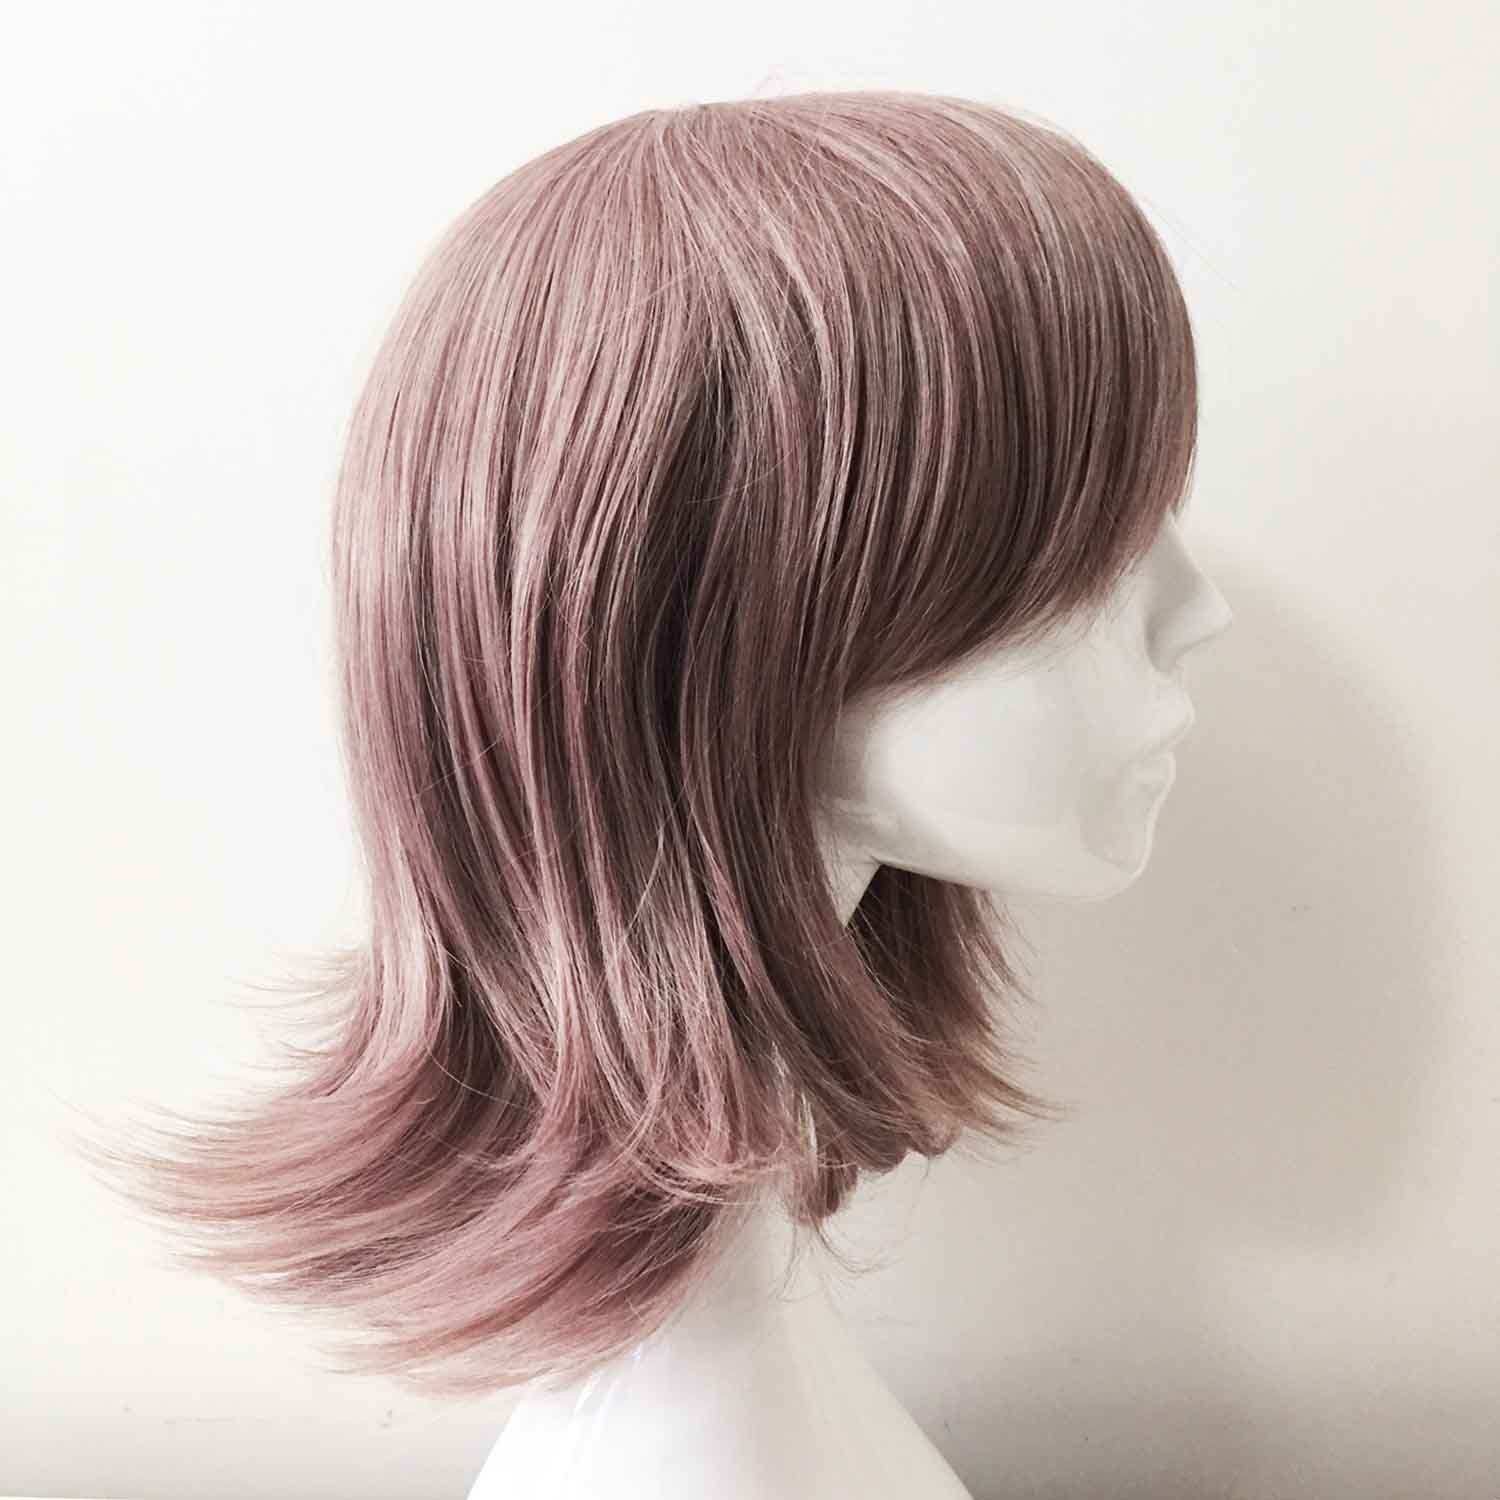 nevermindyrhead Women Dusty Pink Short Straight Fringe Bangs Flick Out Cosplay Wig